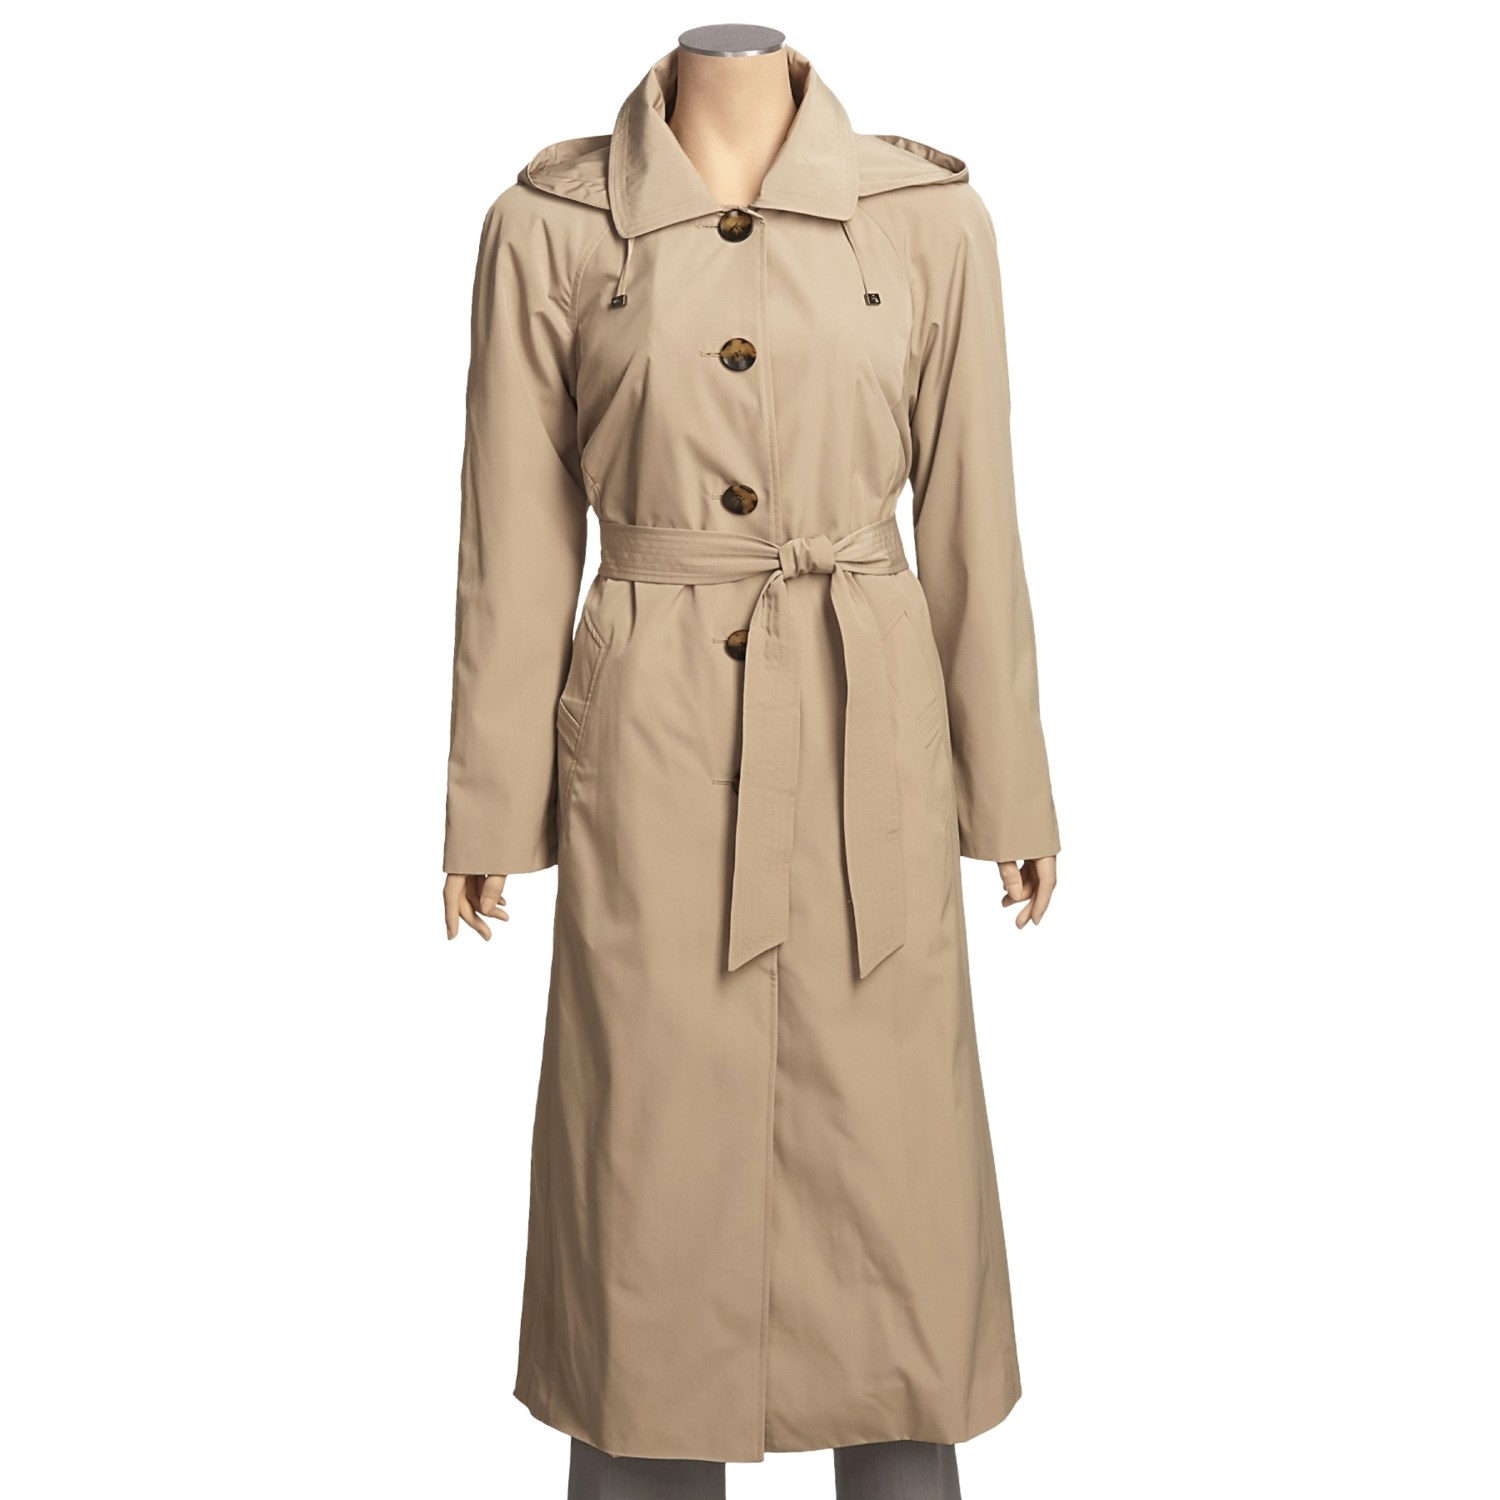 London Fog Single-Breasted Trench Coat - Plus Size, Zip-Out Liner ...